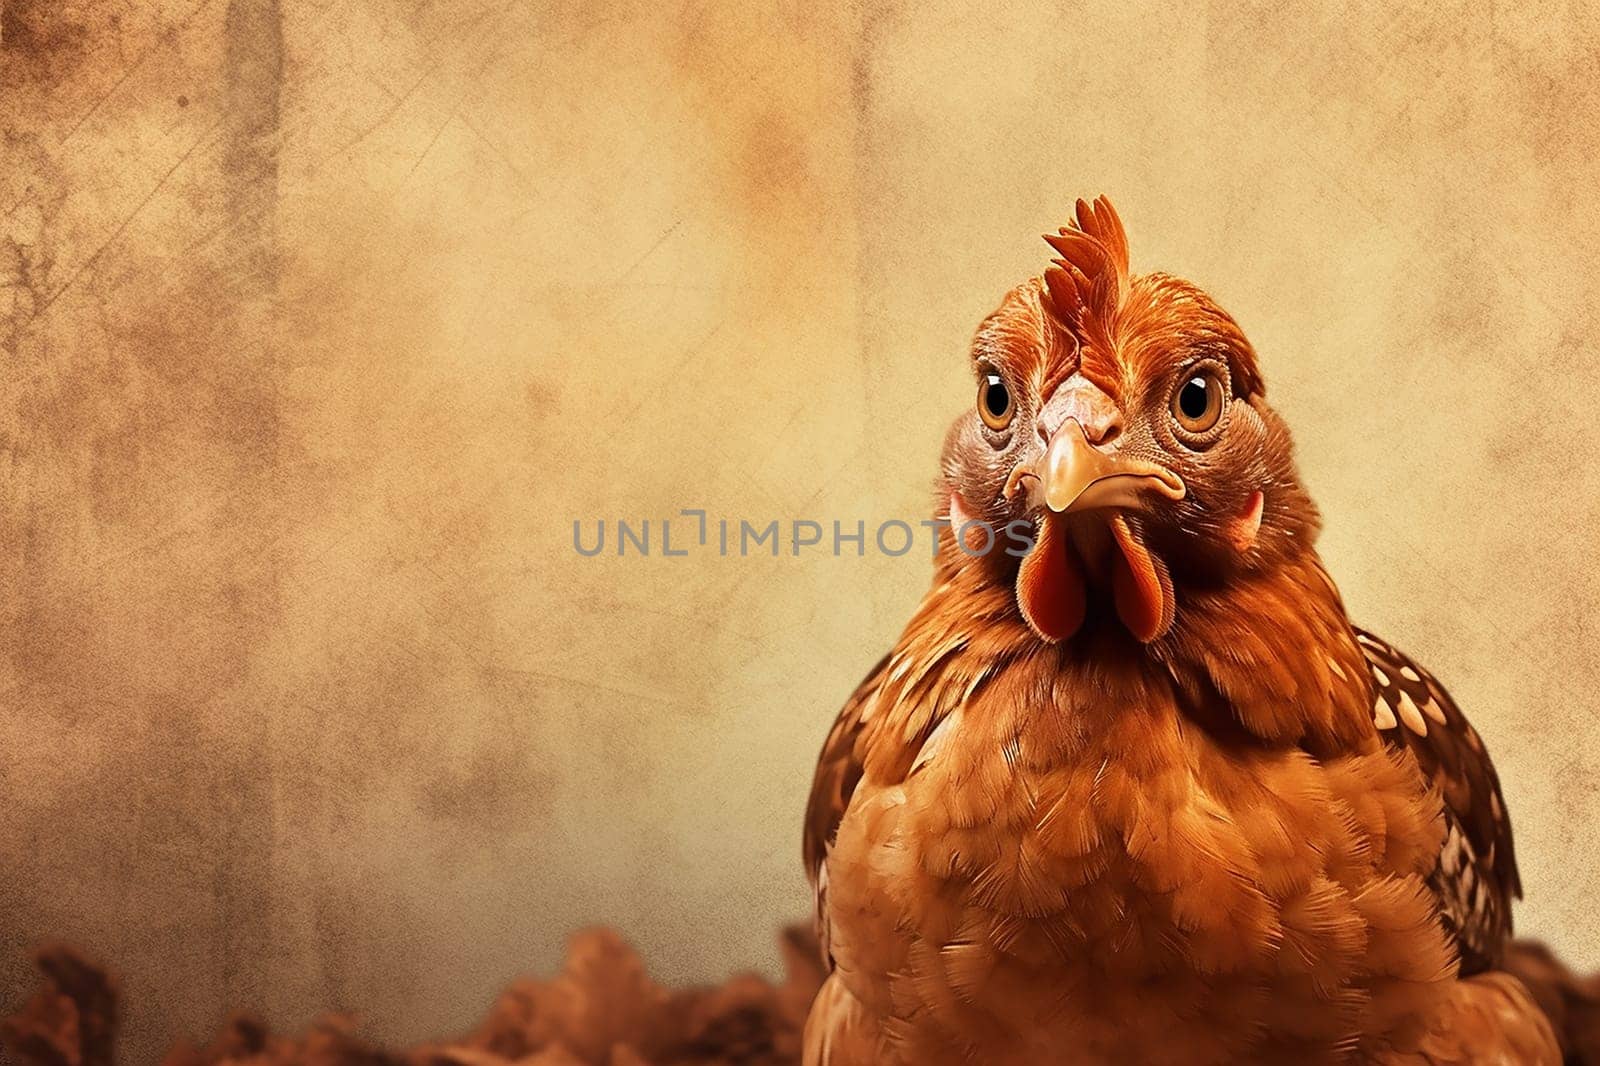 Close-up of a brown chicken against a textured beige background, with a curious expression.